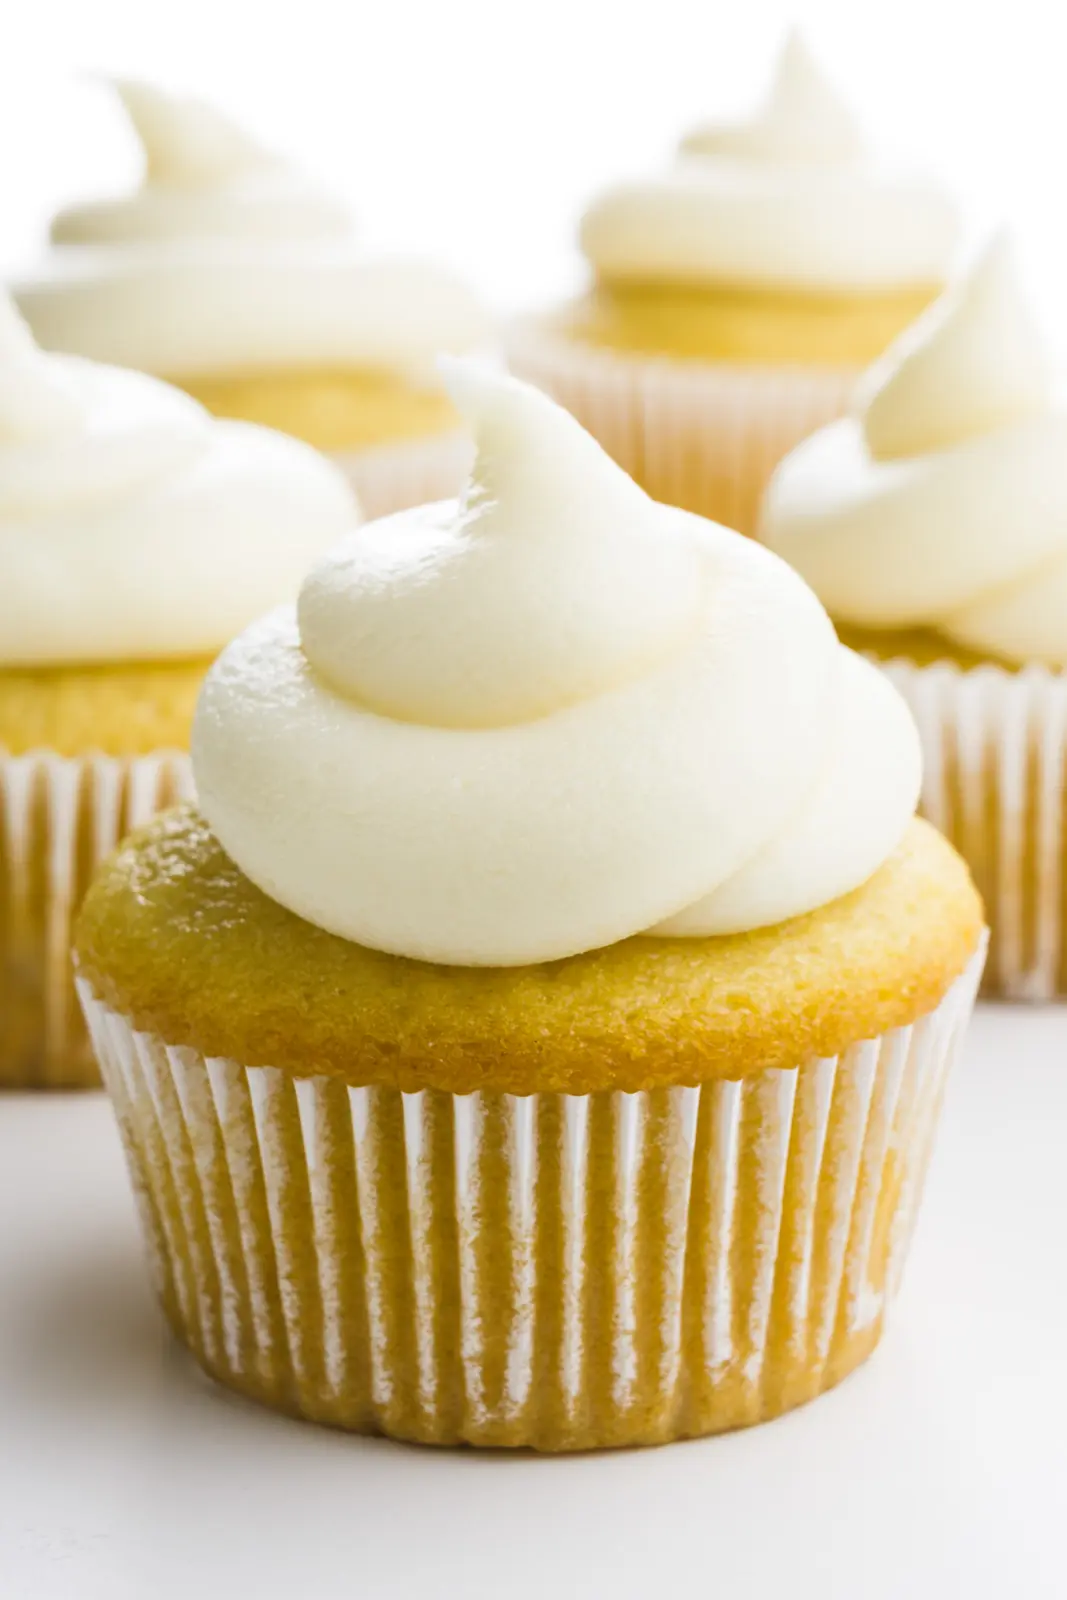 A vanilla cupcake has vanilla frosting swirled on top. there are several more cupcakes in the background.